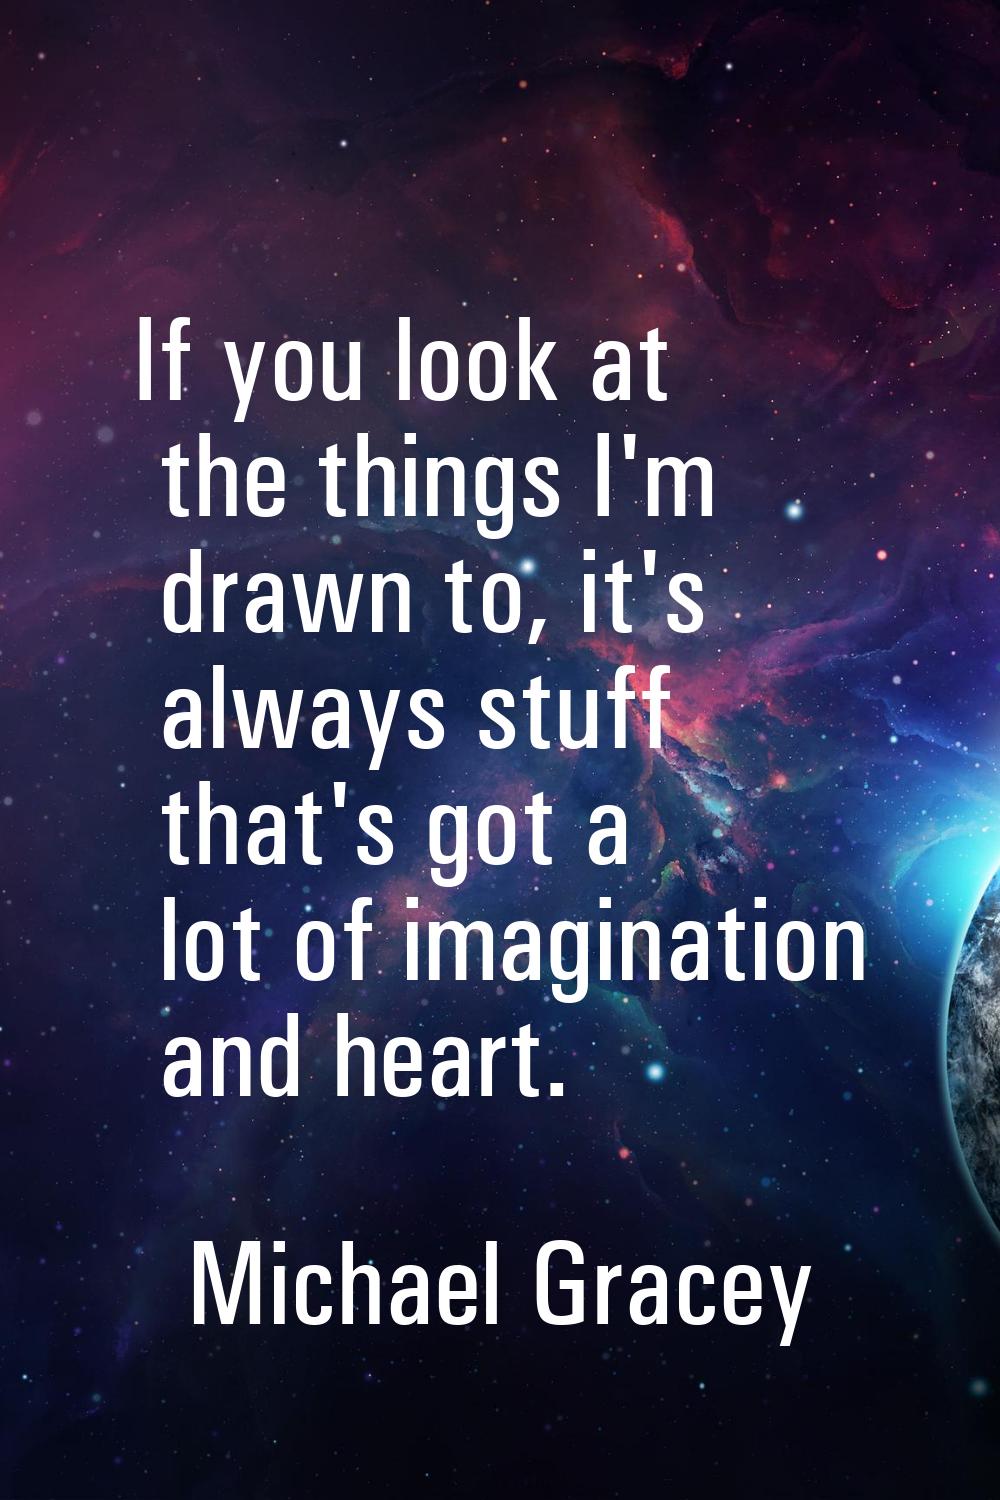 If you look at the things I'm drawn to, it's always stuff that's got a lot of imagination and heart